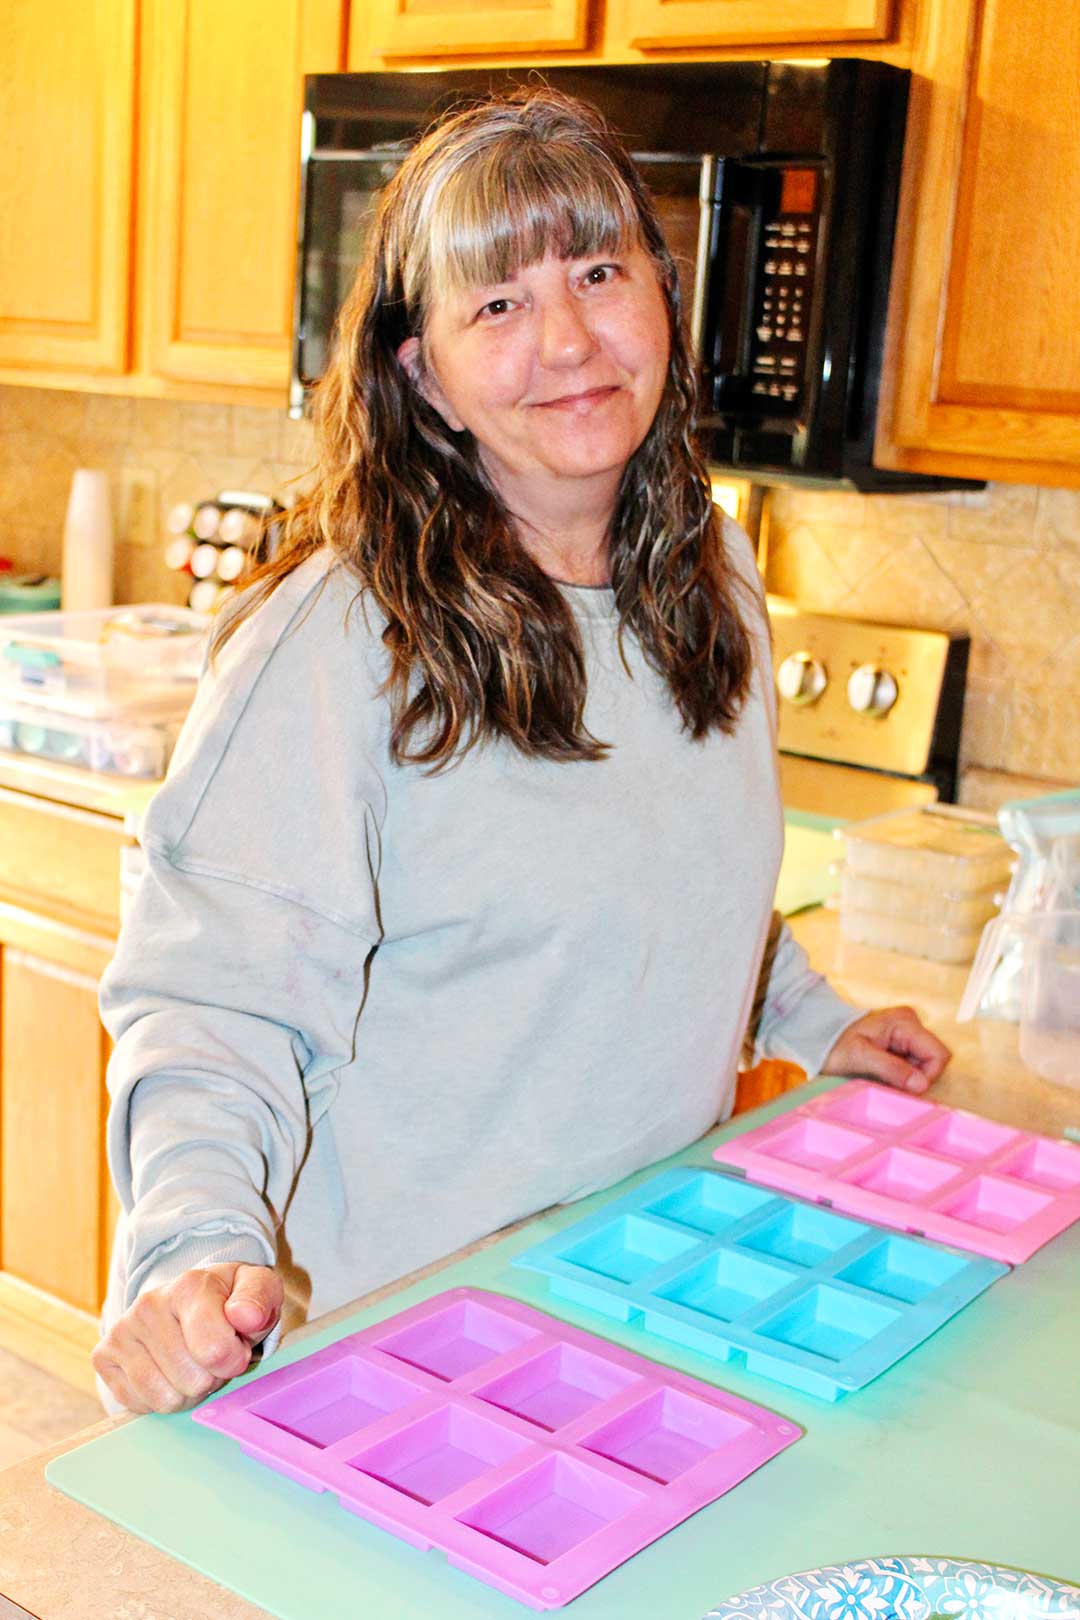 Woman smiles at camera standing at counter with three colorful rectangular soap molds.